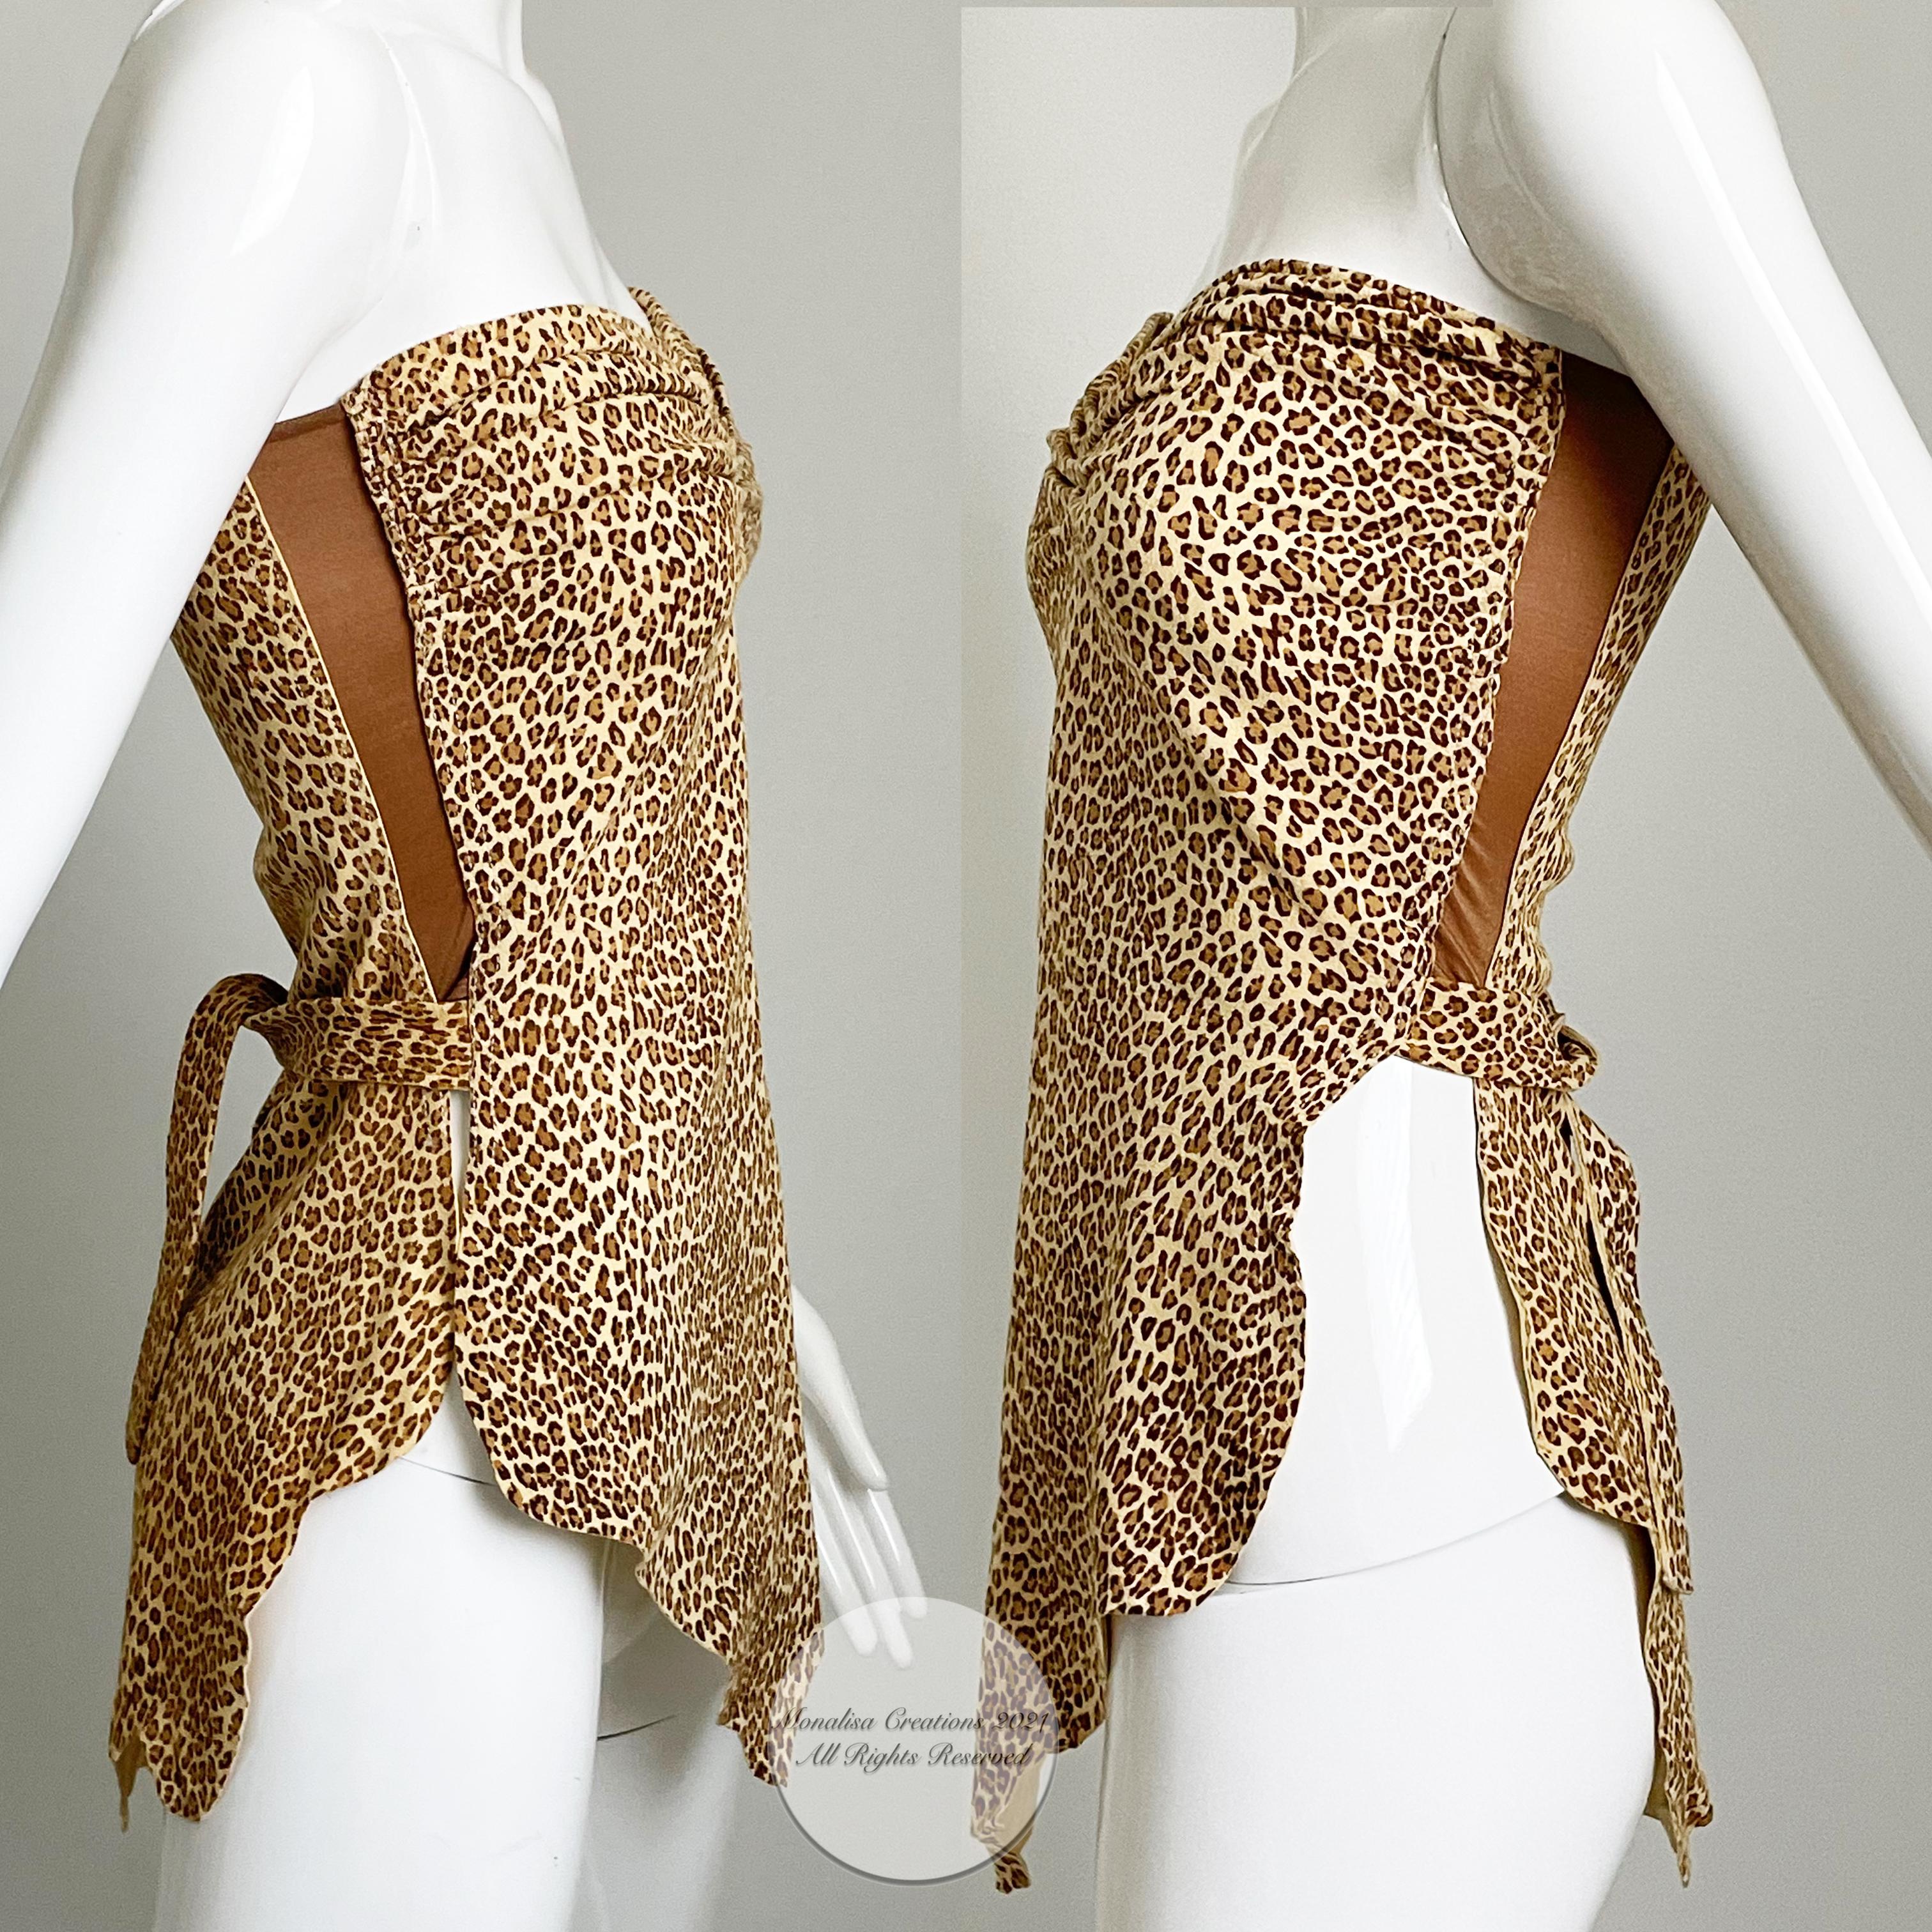 Women's or Men's Vintage Norma Kamali OMO Halter Top with Wrap Ties Leopard Print Leather HTF